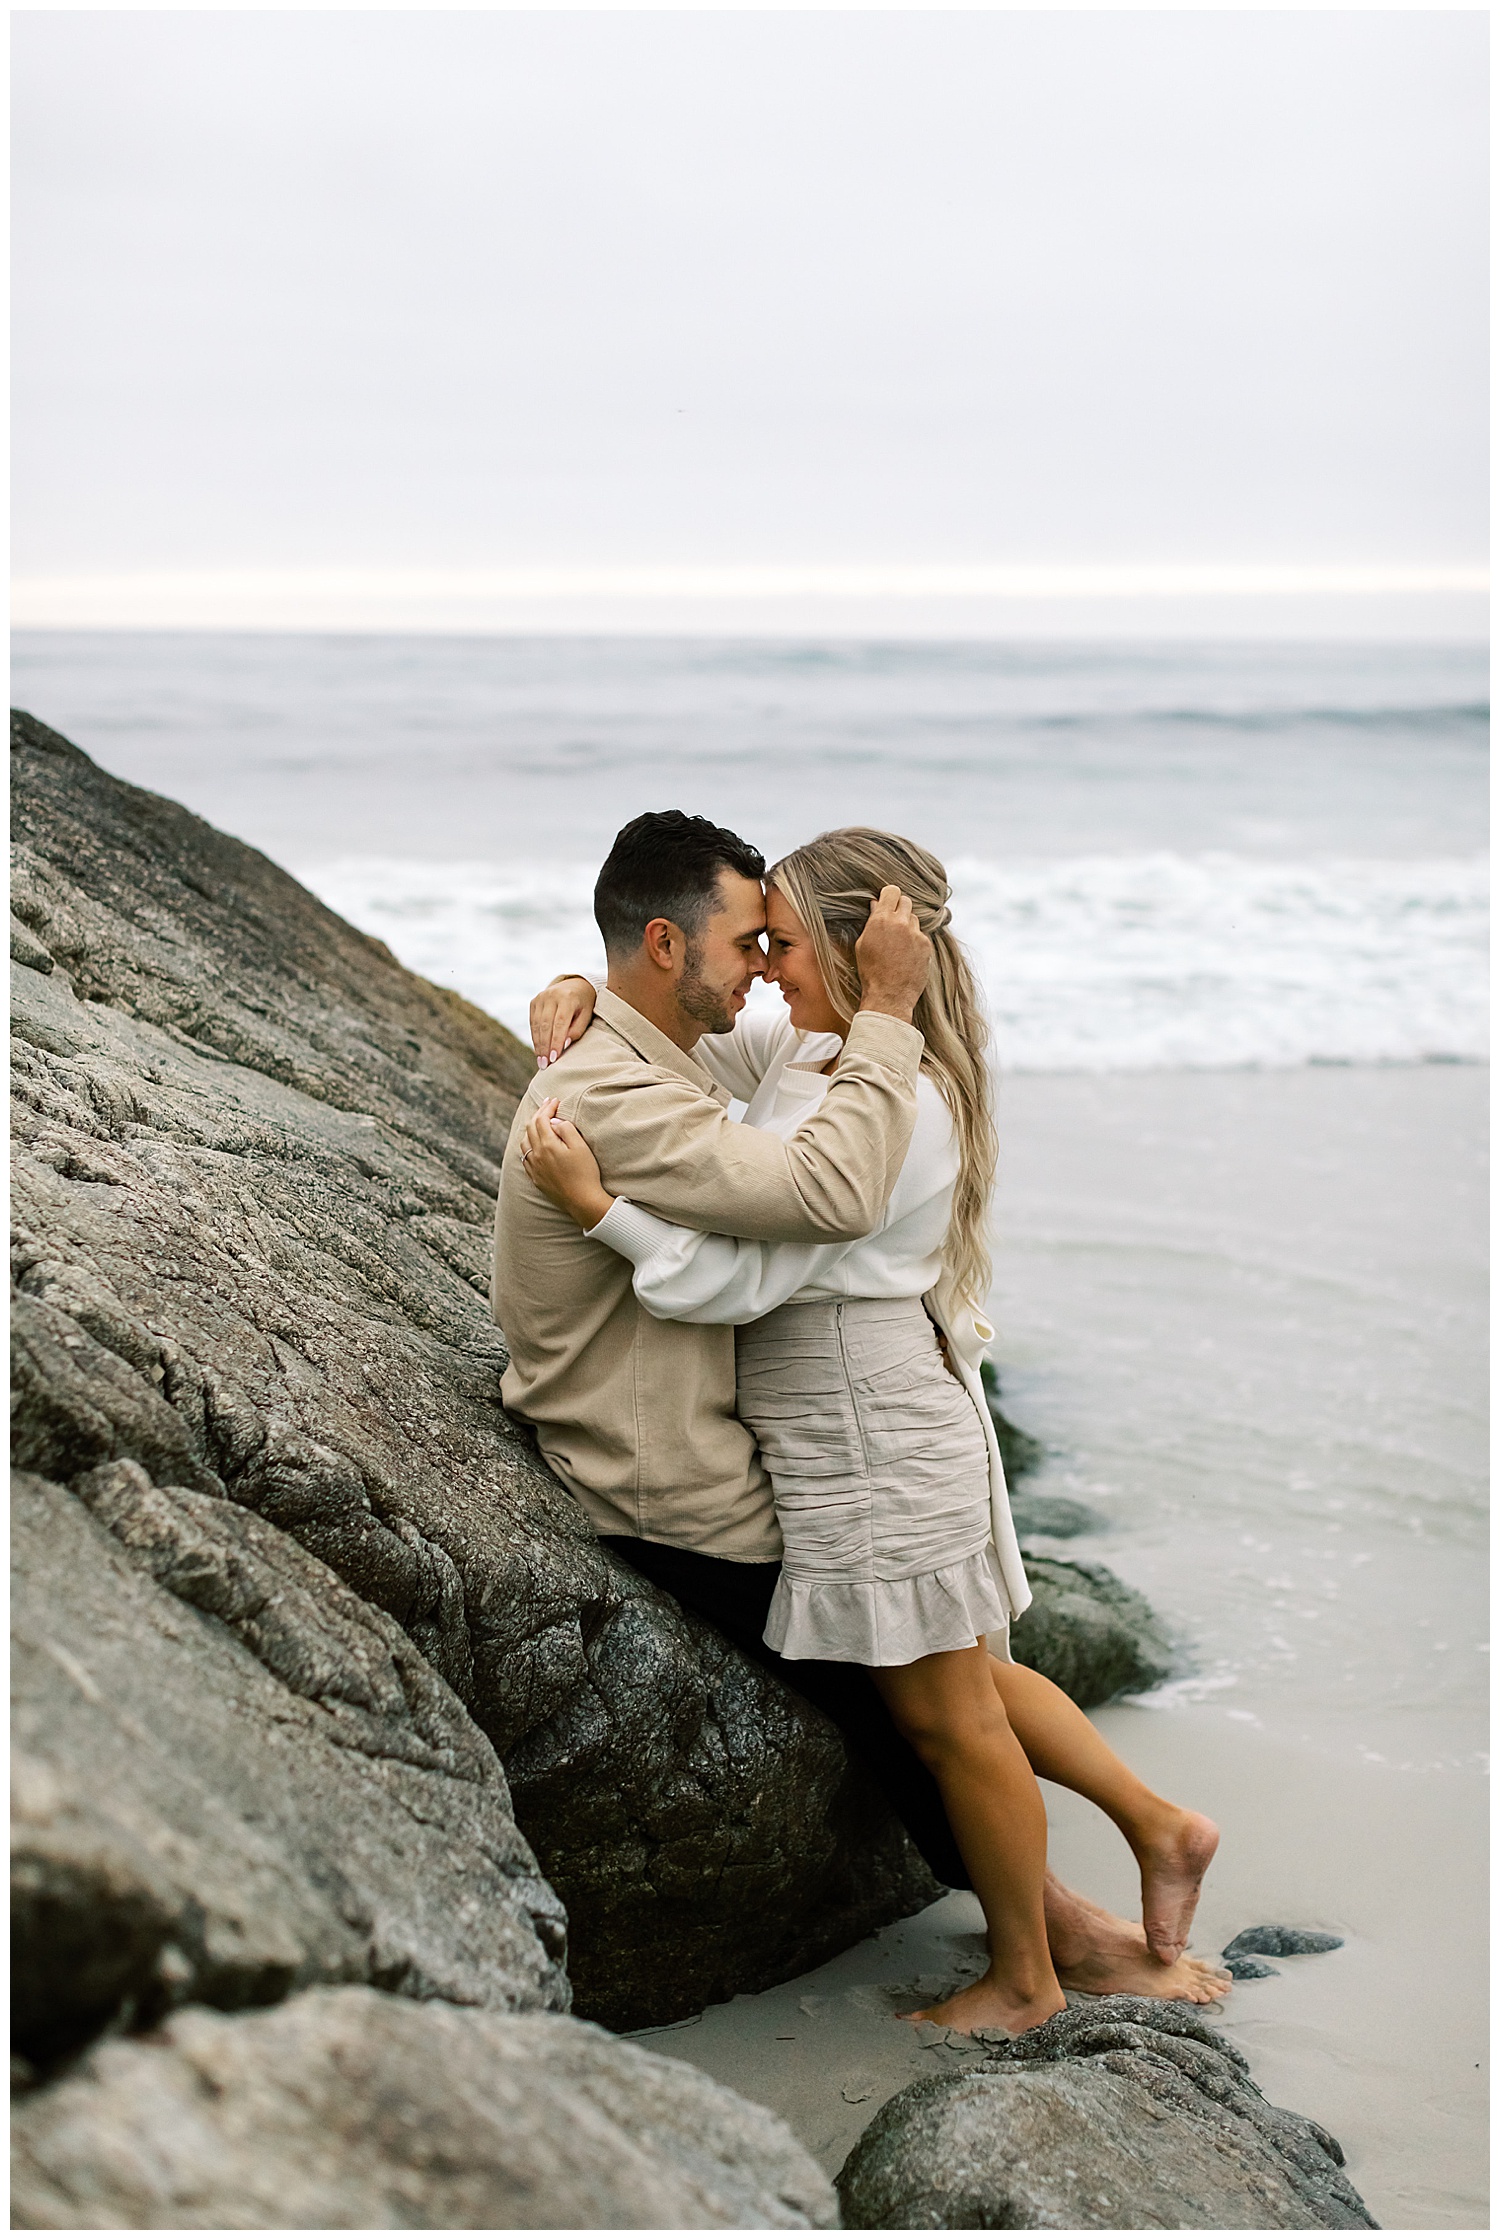 portrait of the couple embracing and touching their foreheads together while sitting on the rocks